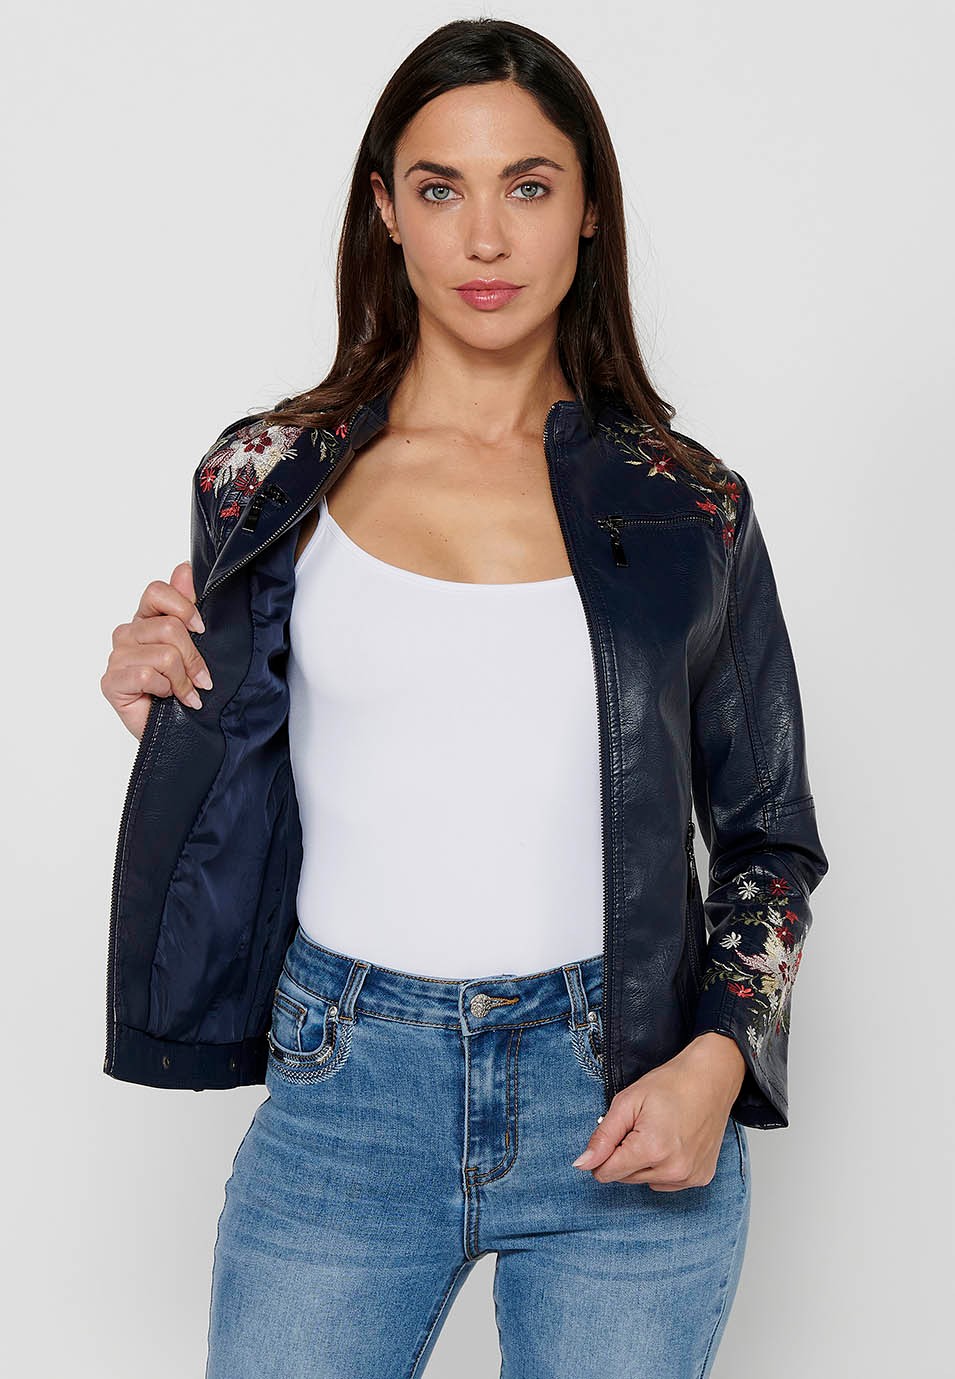 Leather-effect jacket with front zipper closure with floral embroidered details with round neck and front pockets in Navy for Women 6